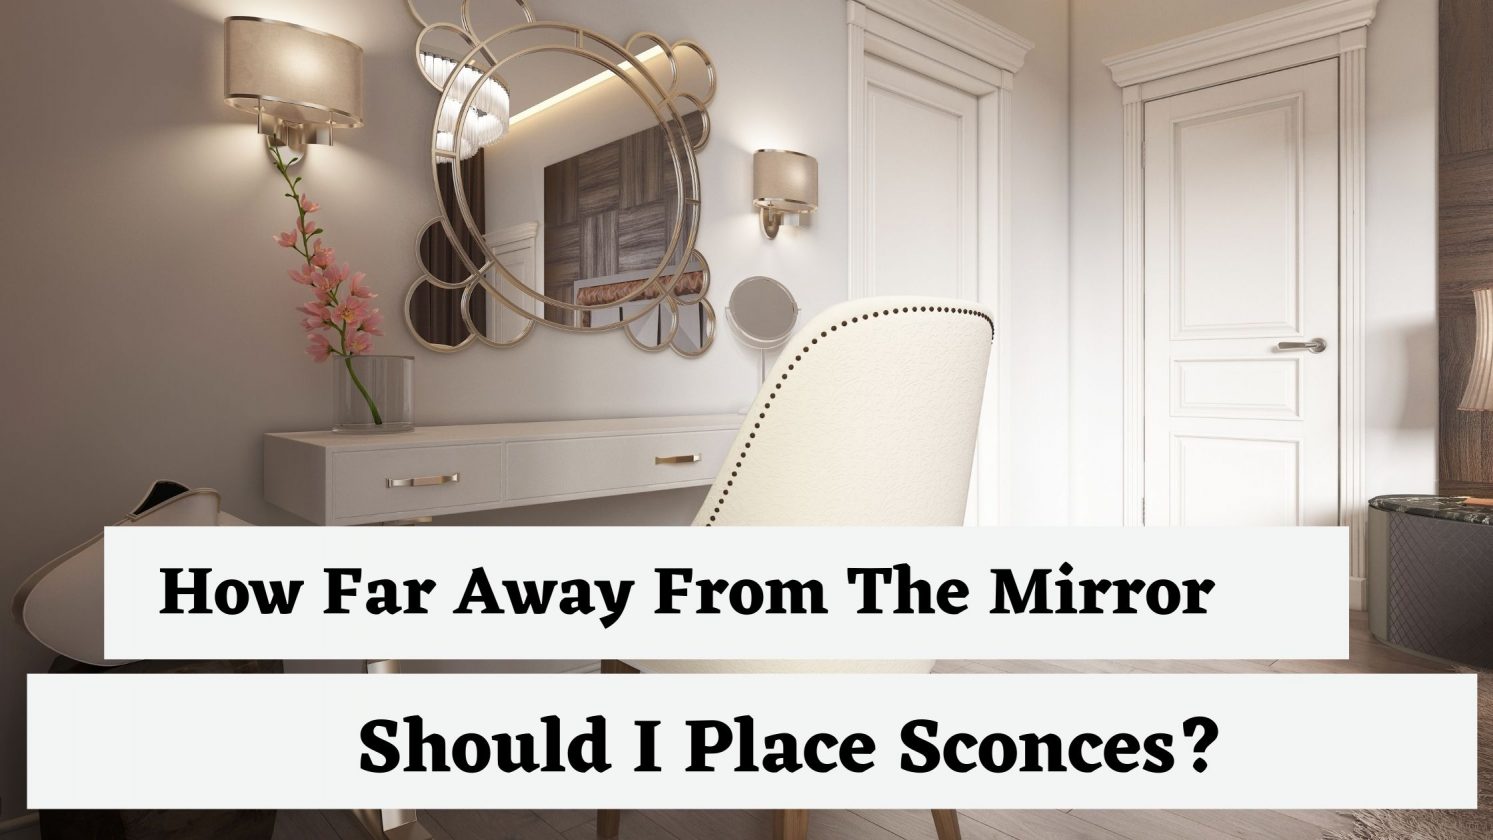 How Far Away From The Mirror Should I Place Sconces?